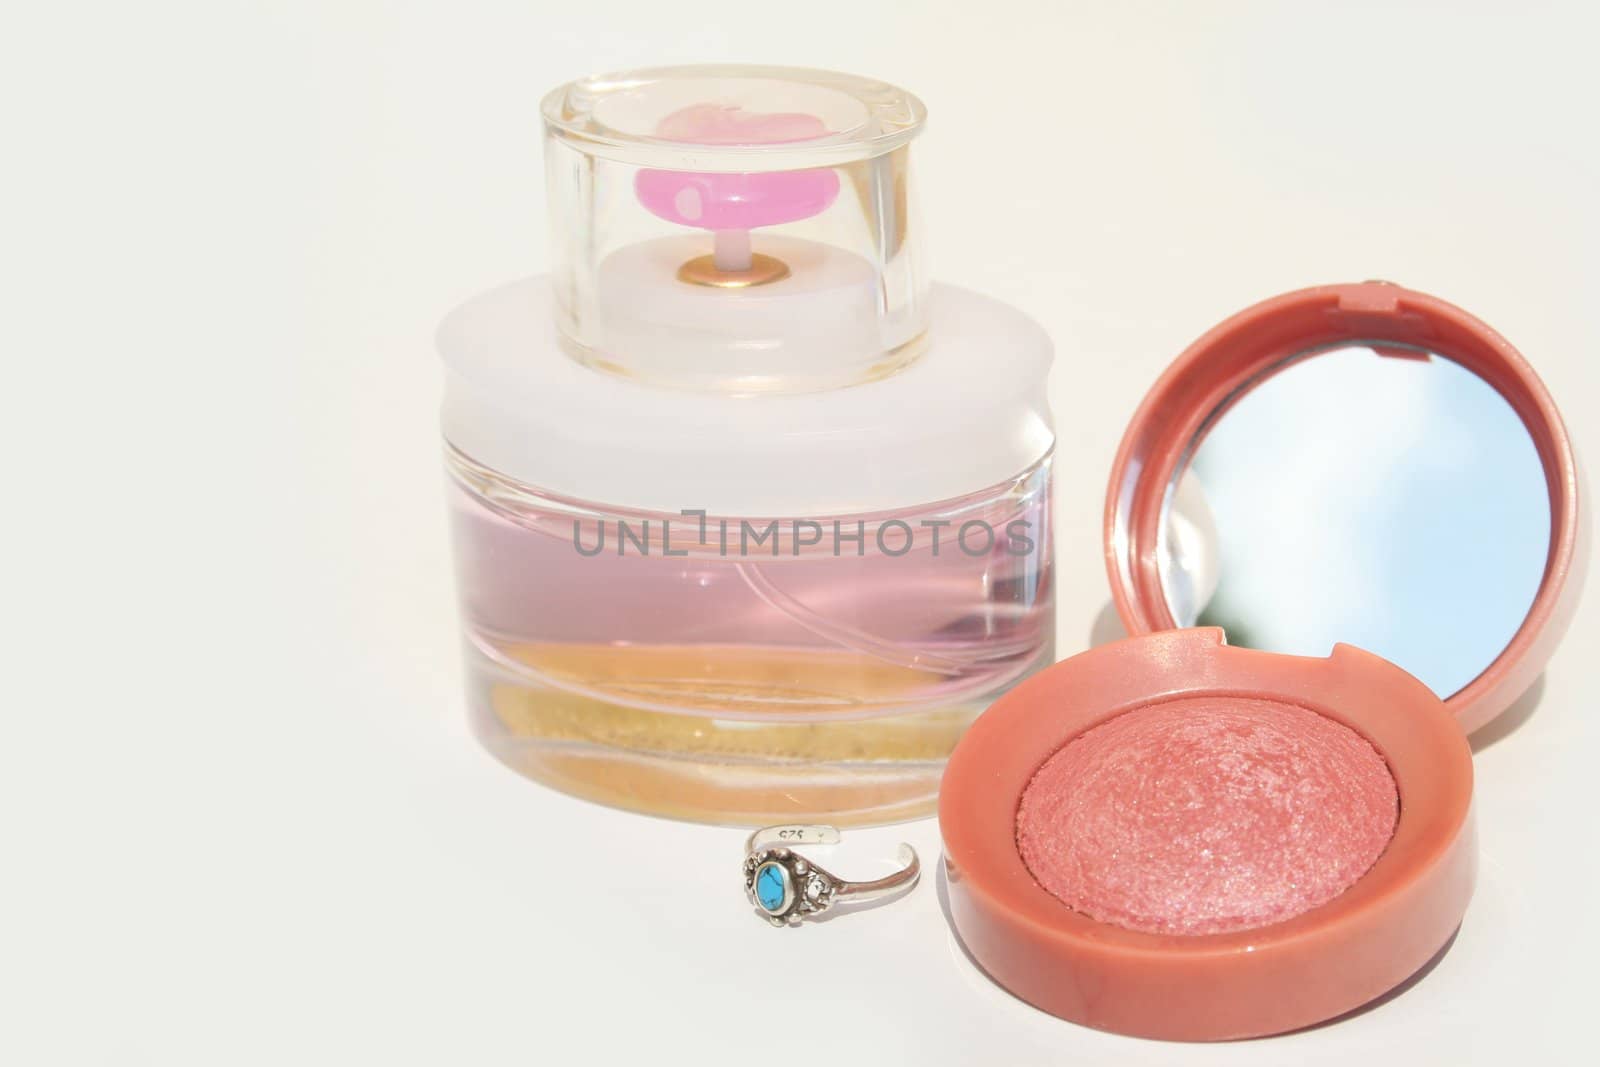 Perfume, blush and a blue stone ring on white background with copy space on left